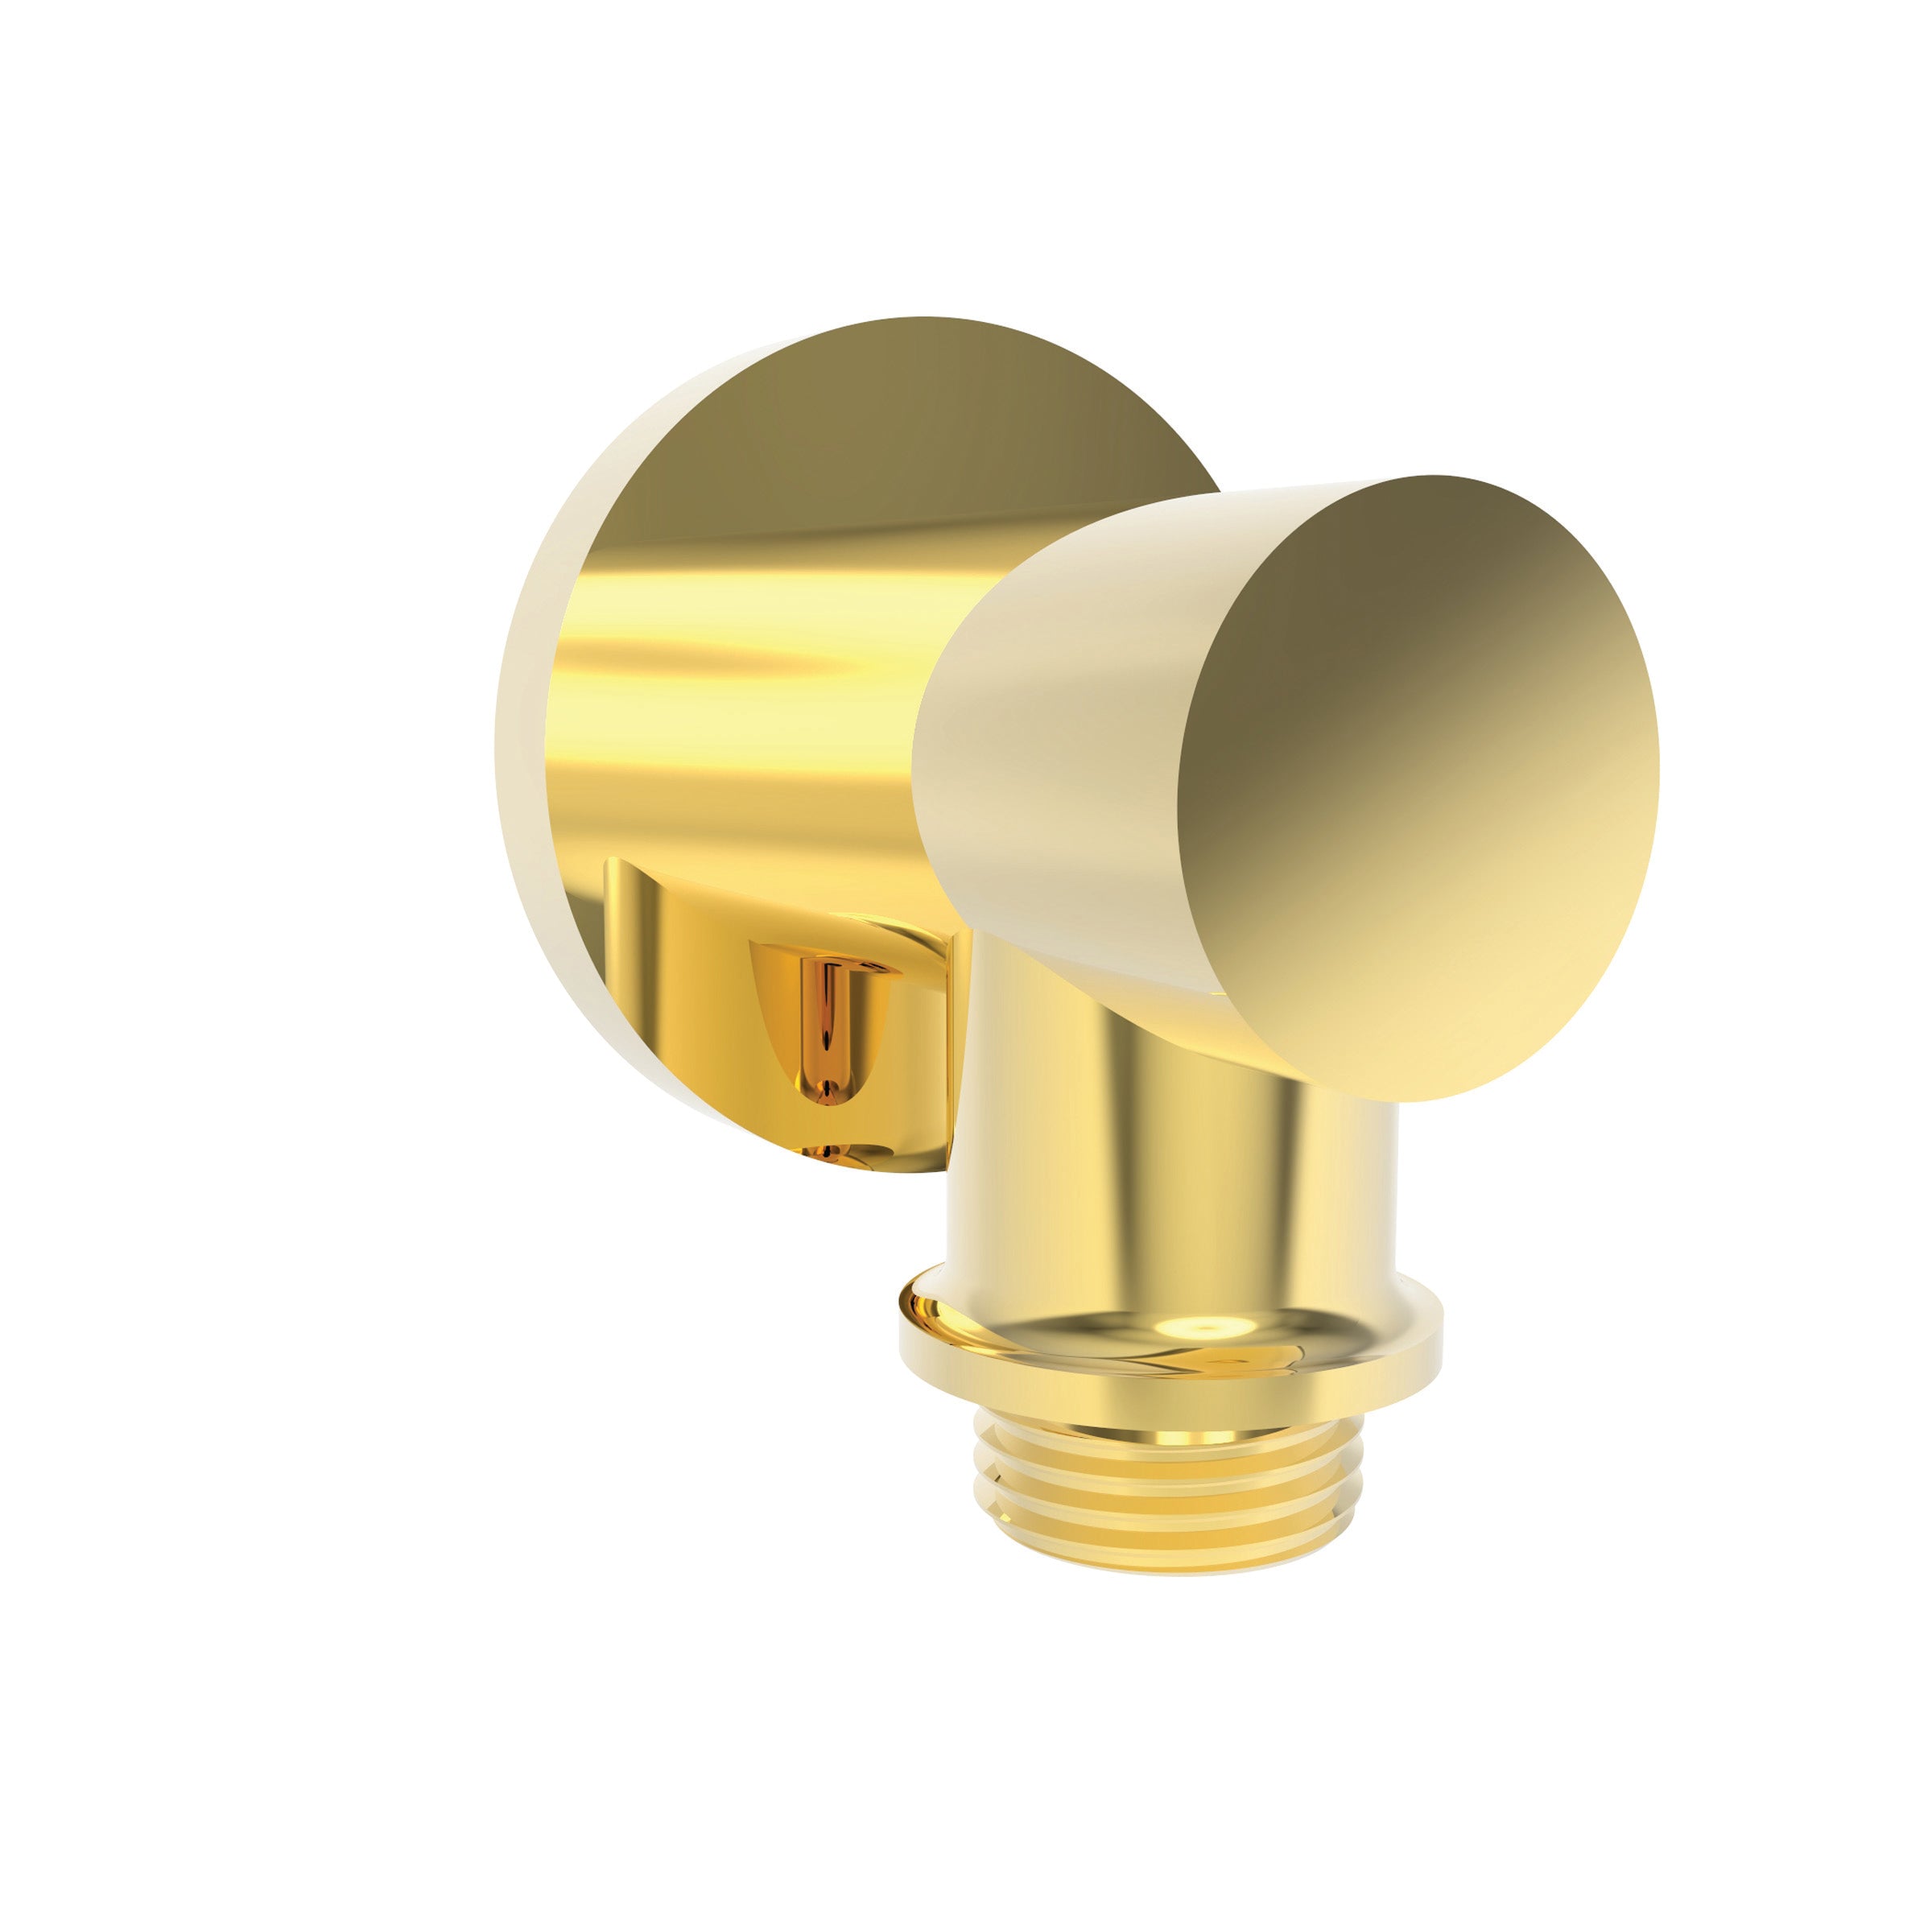 Newport Brass Tub & Shower Wall Supply Elbow for Hand Shower Hose